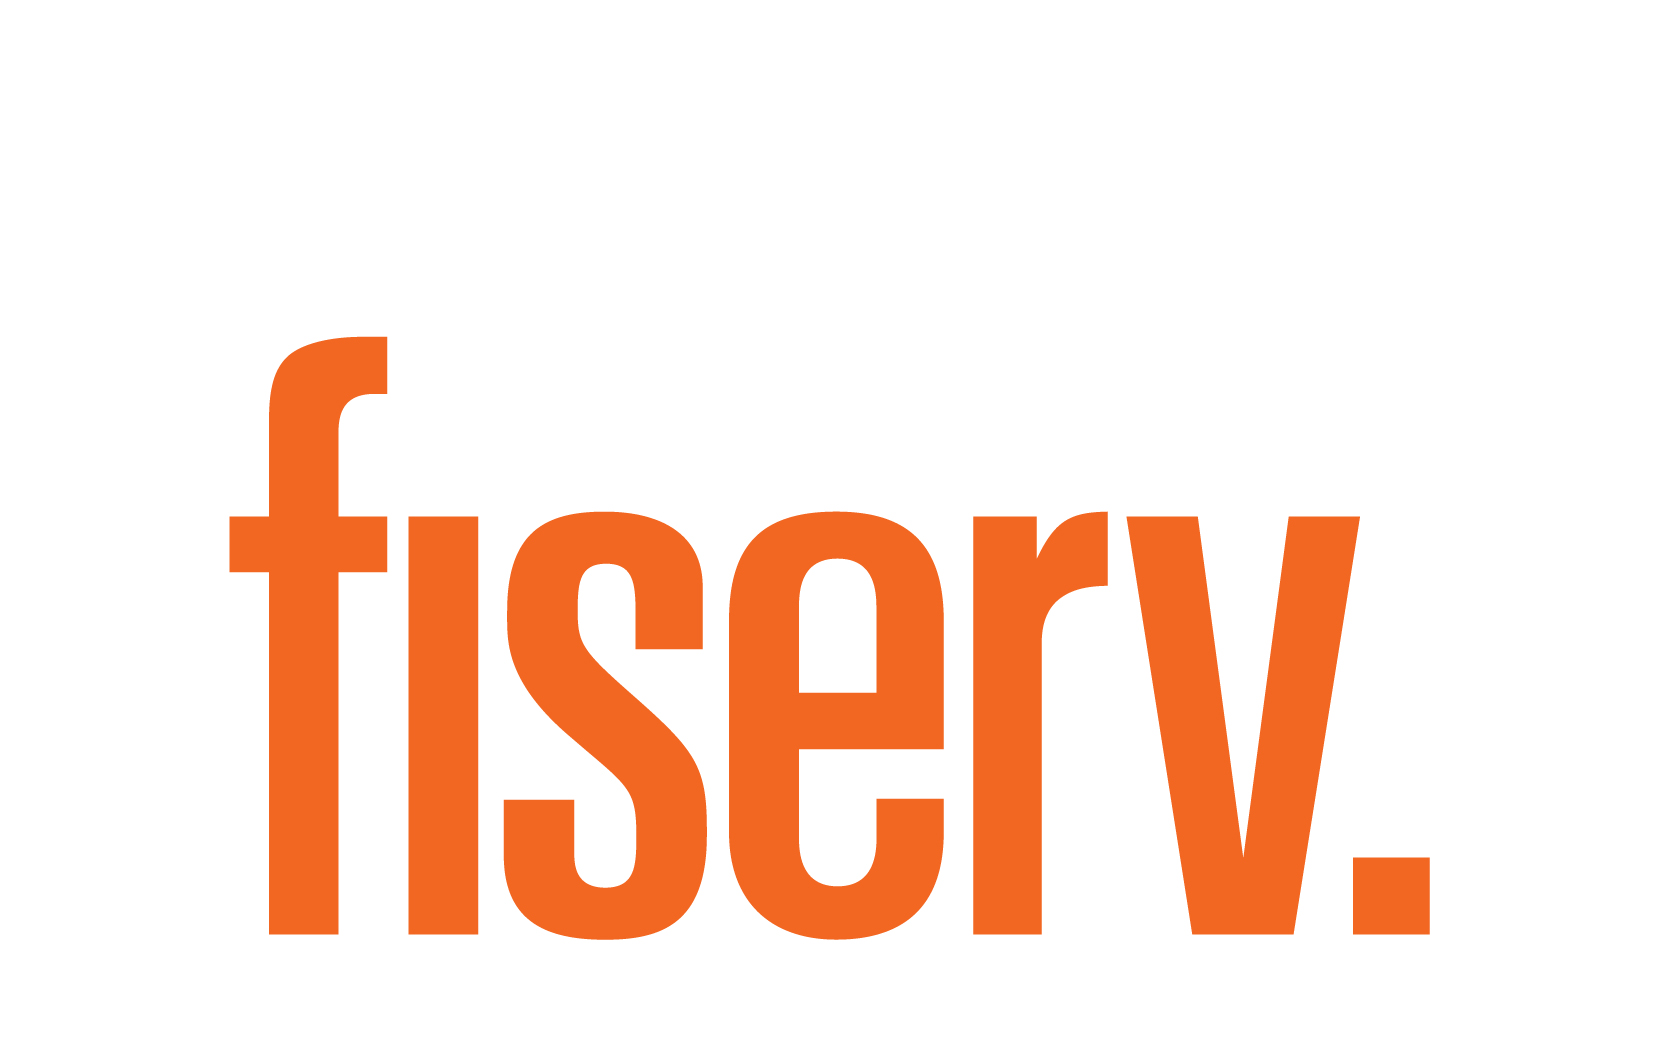 Fiserv Forges Data-Sharing Partnership With Plaid | PYMNTS.com